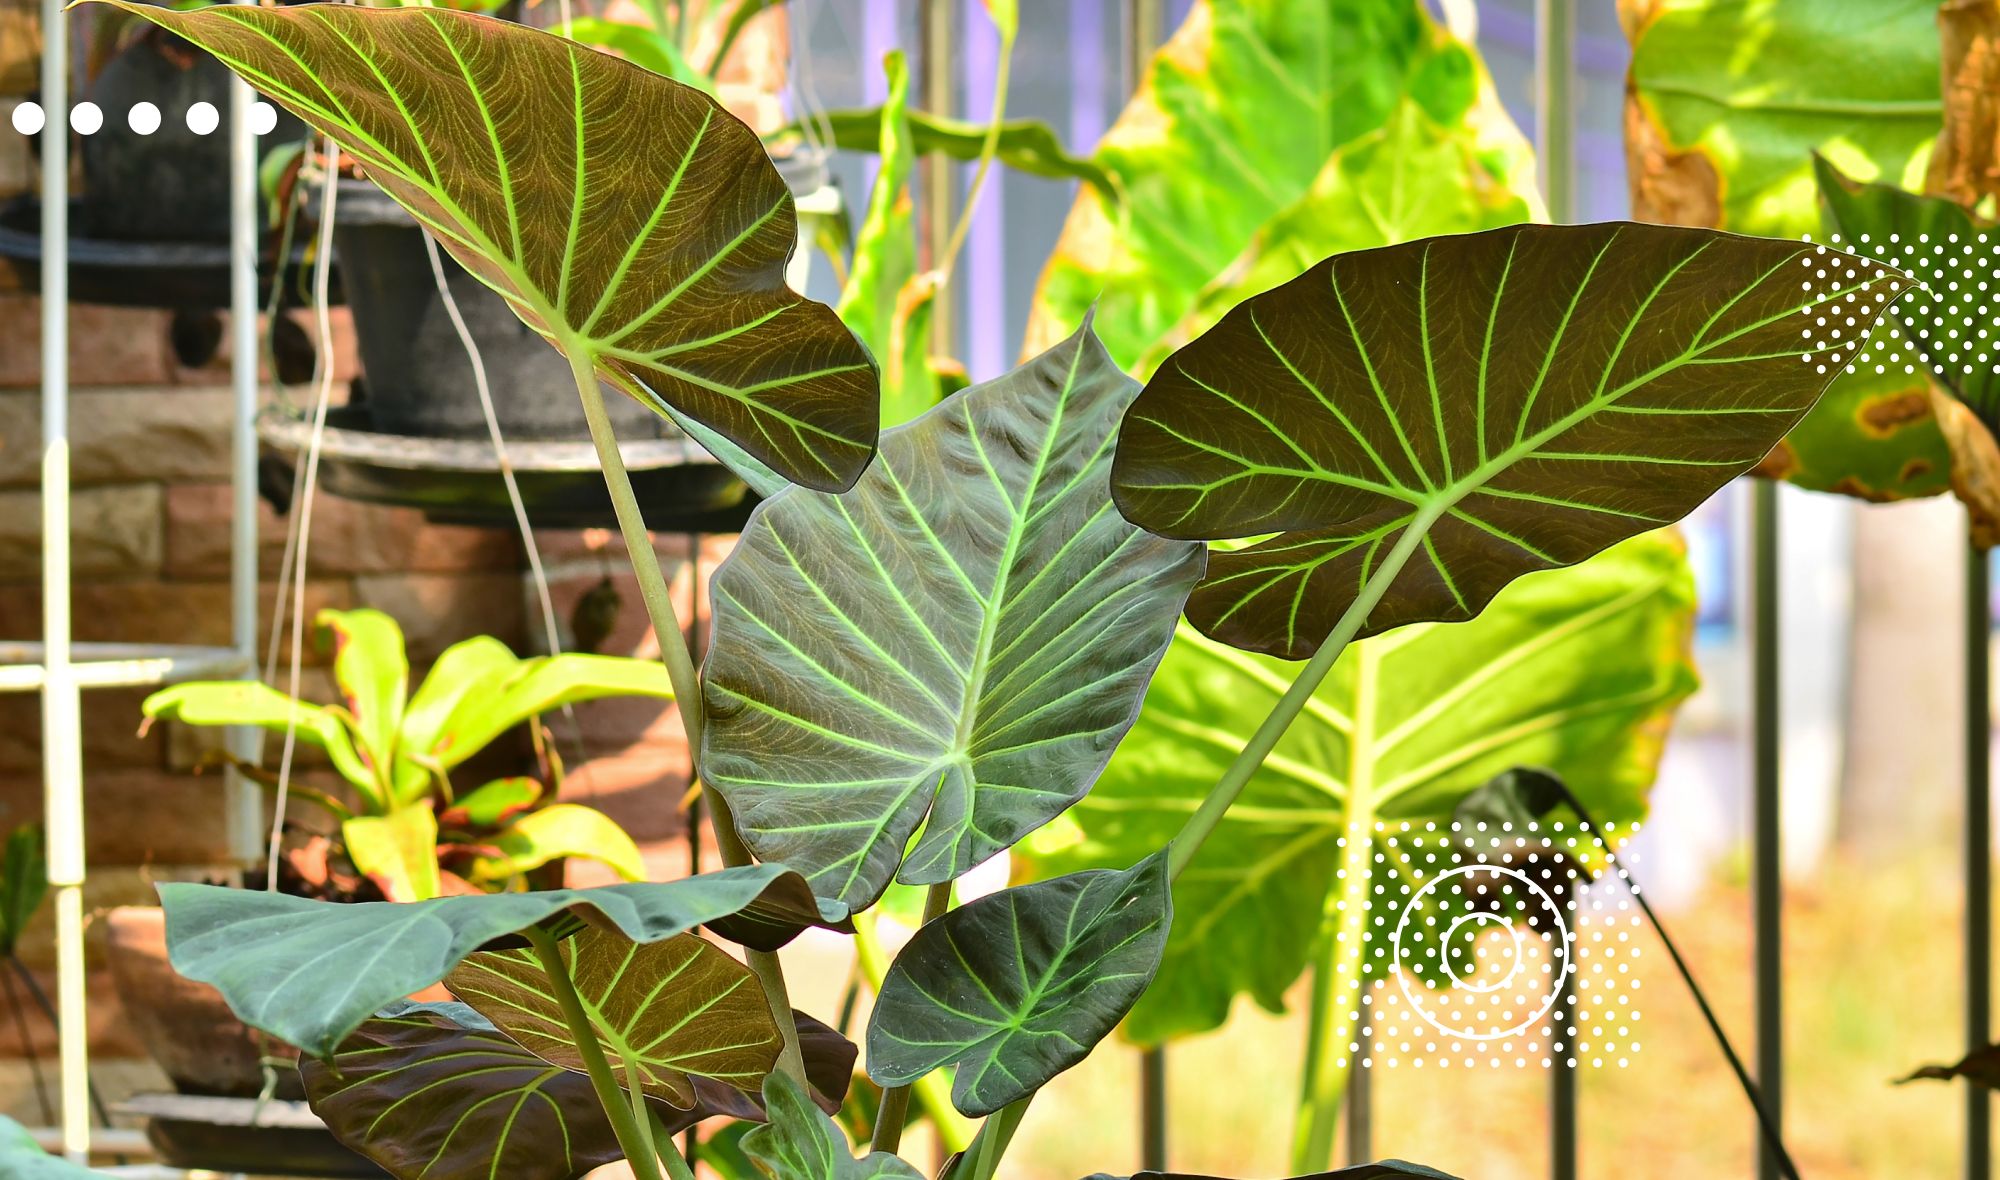 Alocasia Regal Shield: How to Care for The Elephant Ear Plant